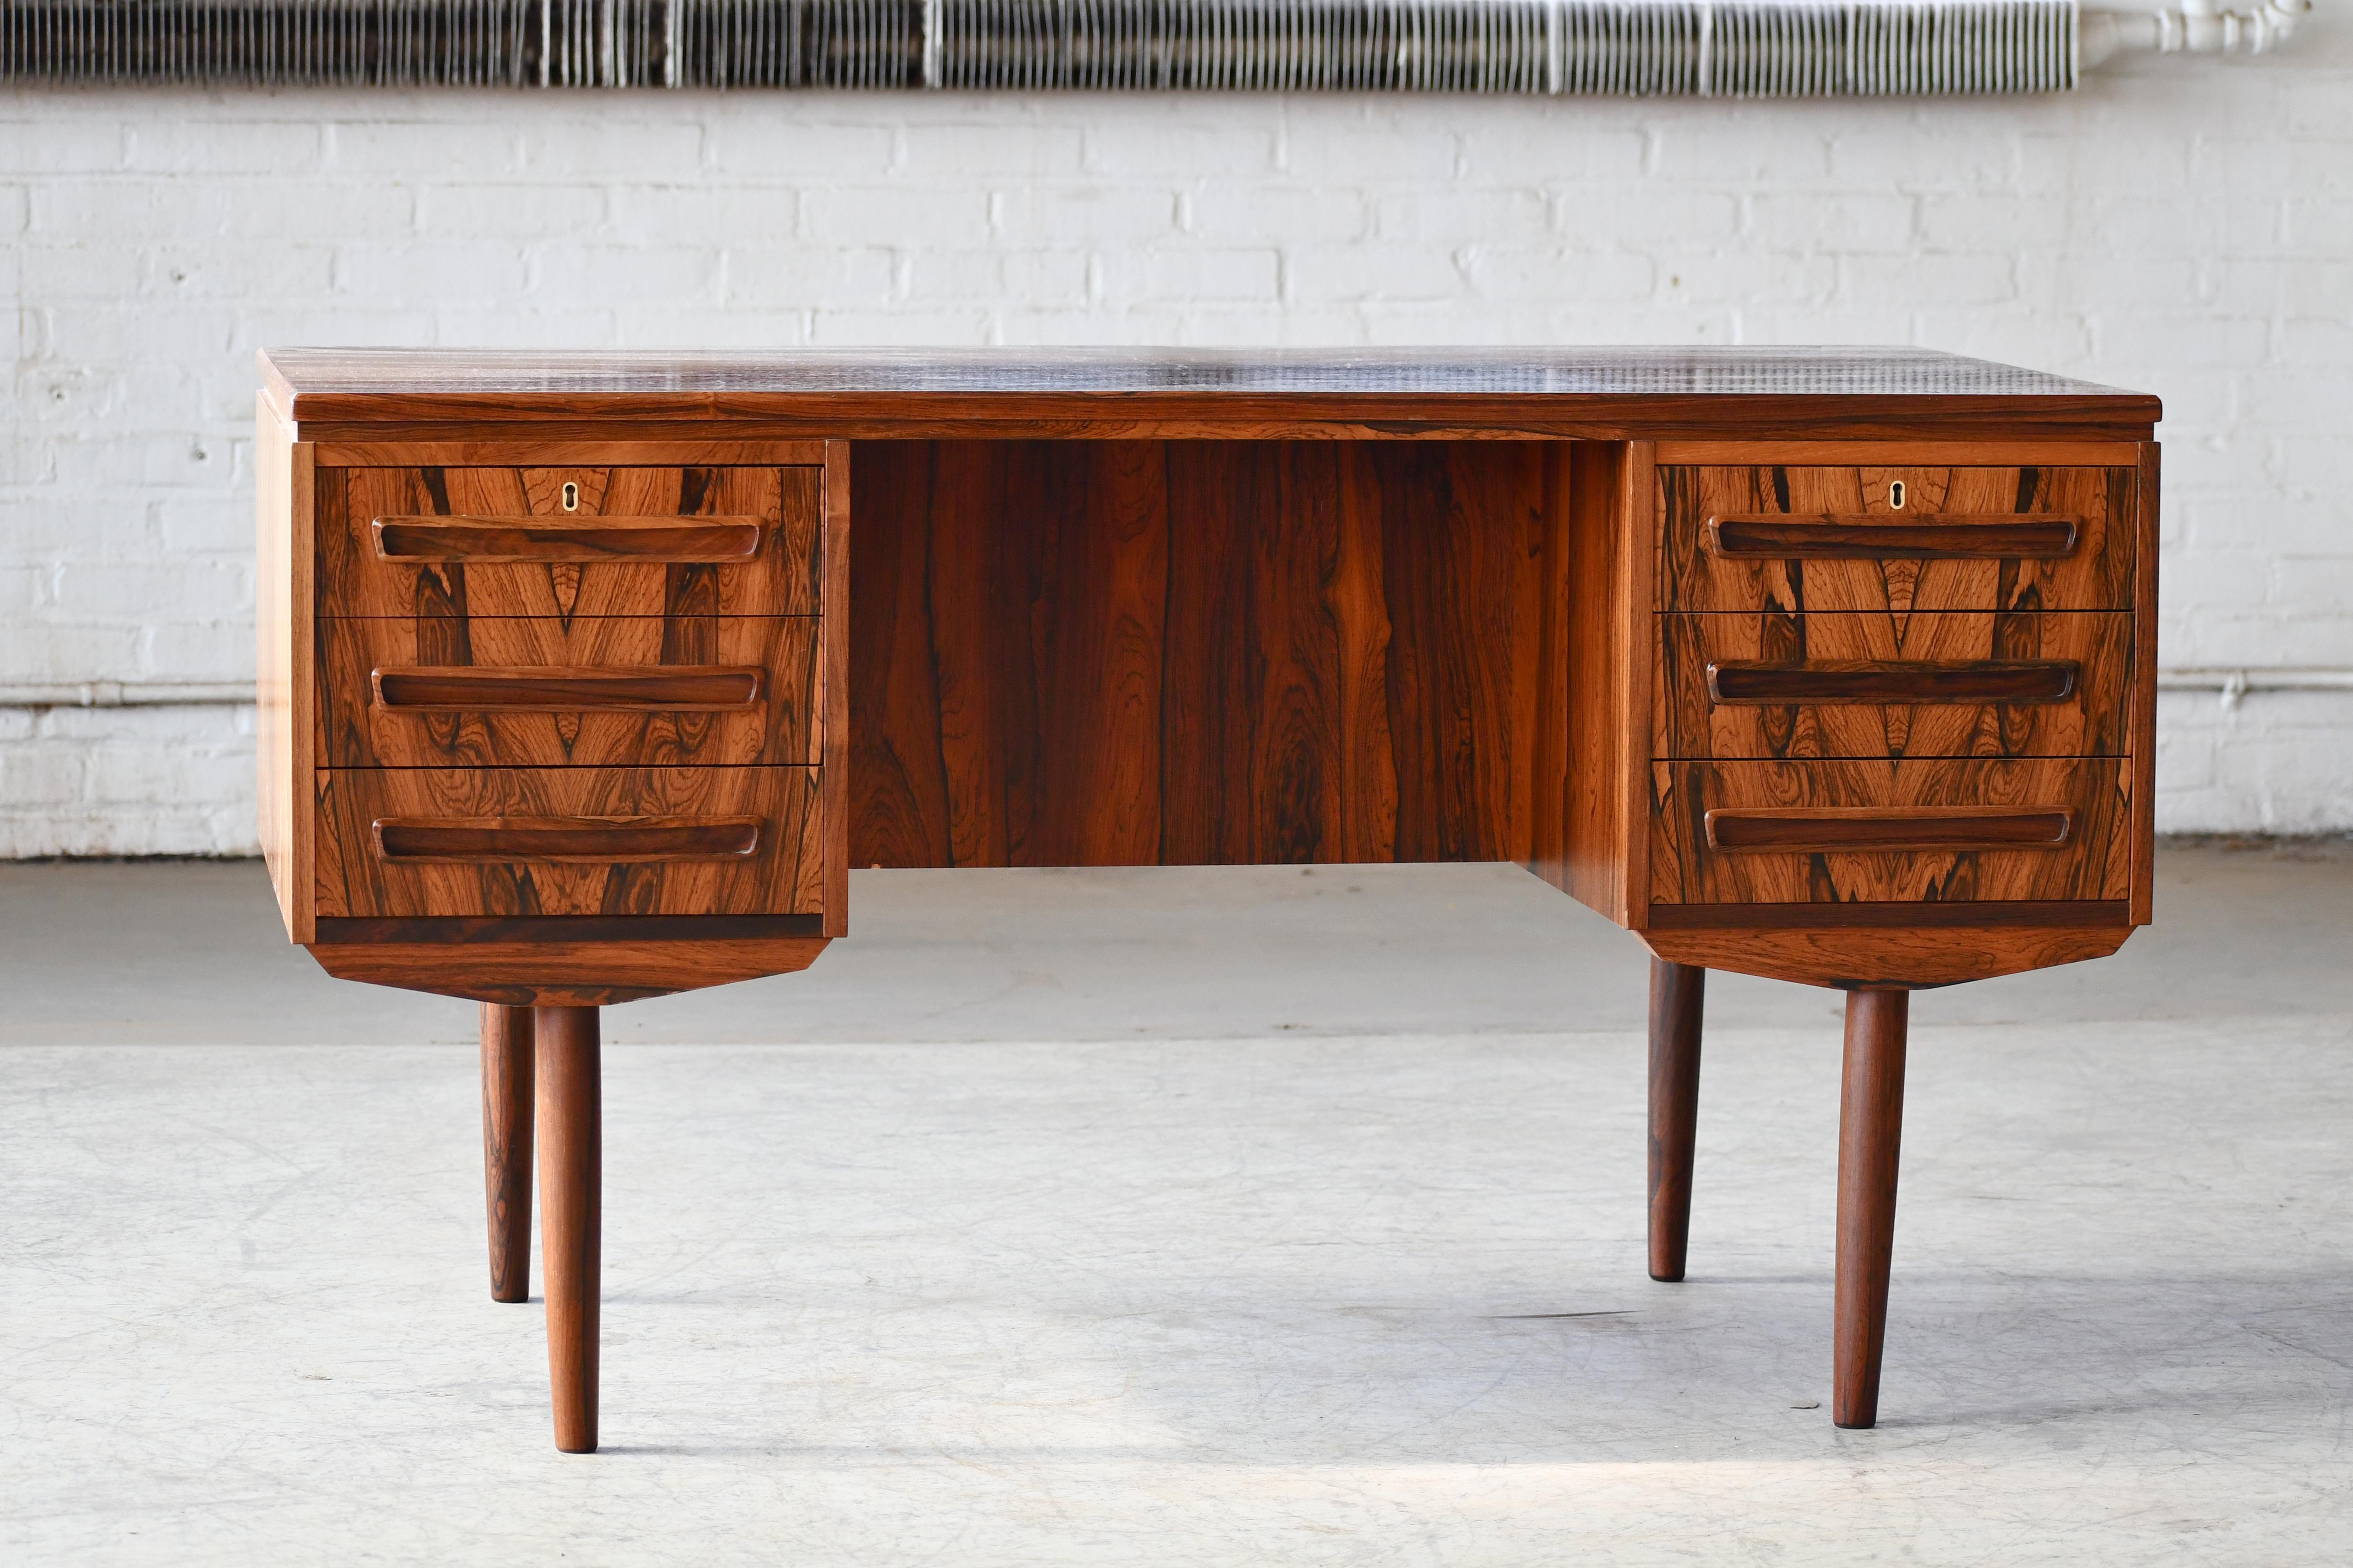 Beautiful Danish small executive desk in the style of ai Kristiansen and made of rosewood in Denmark sometime in the late 1950s or early 1960s by J. Svenstrup Mobler. This desk is slightly smaller than a traditional executive desk and fits well in